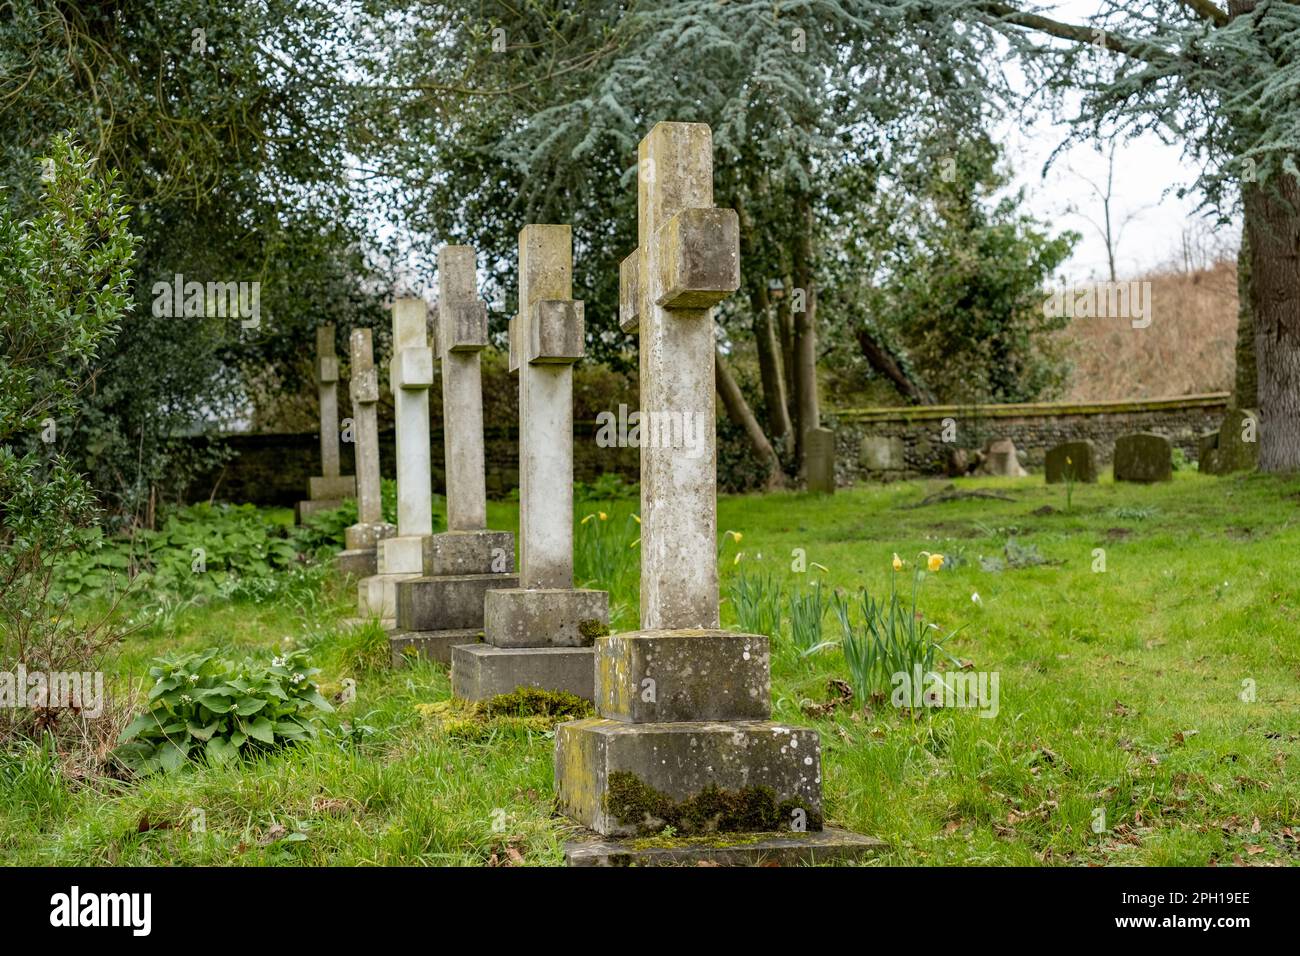 Row of ornate cross headstones in a churchyard with selective focus Stock Photo